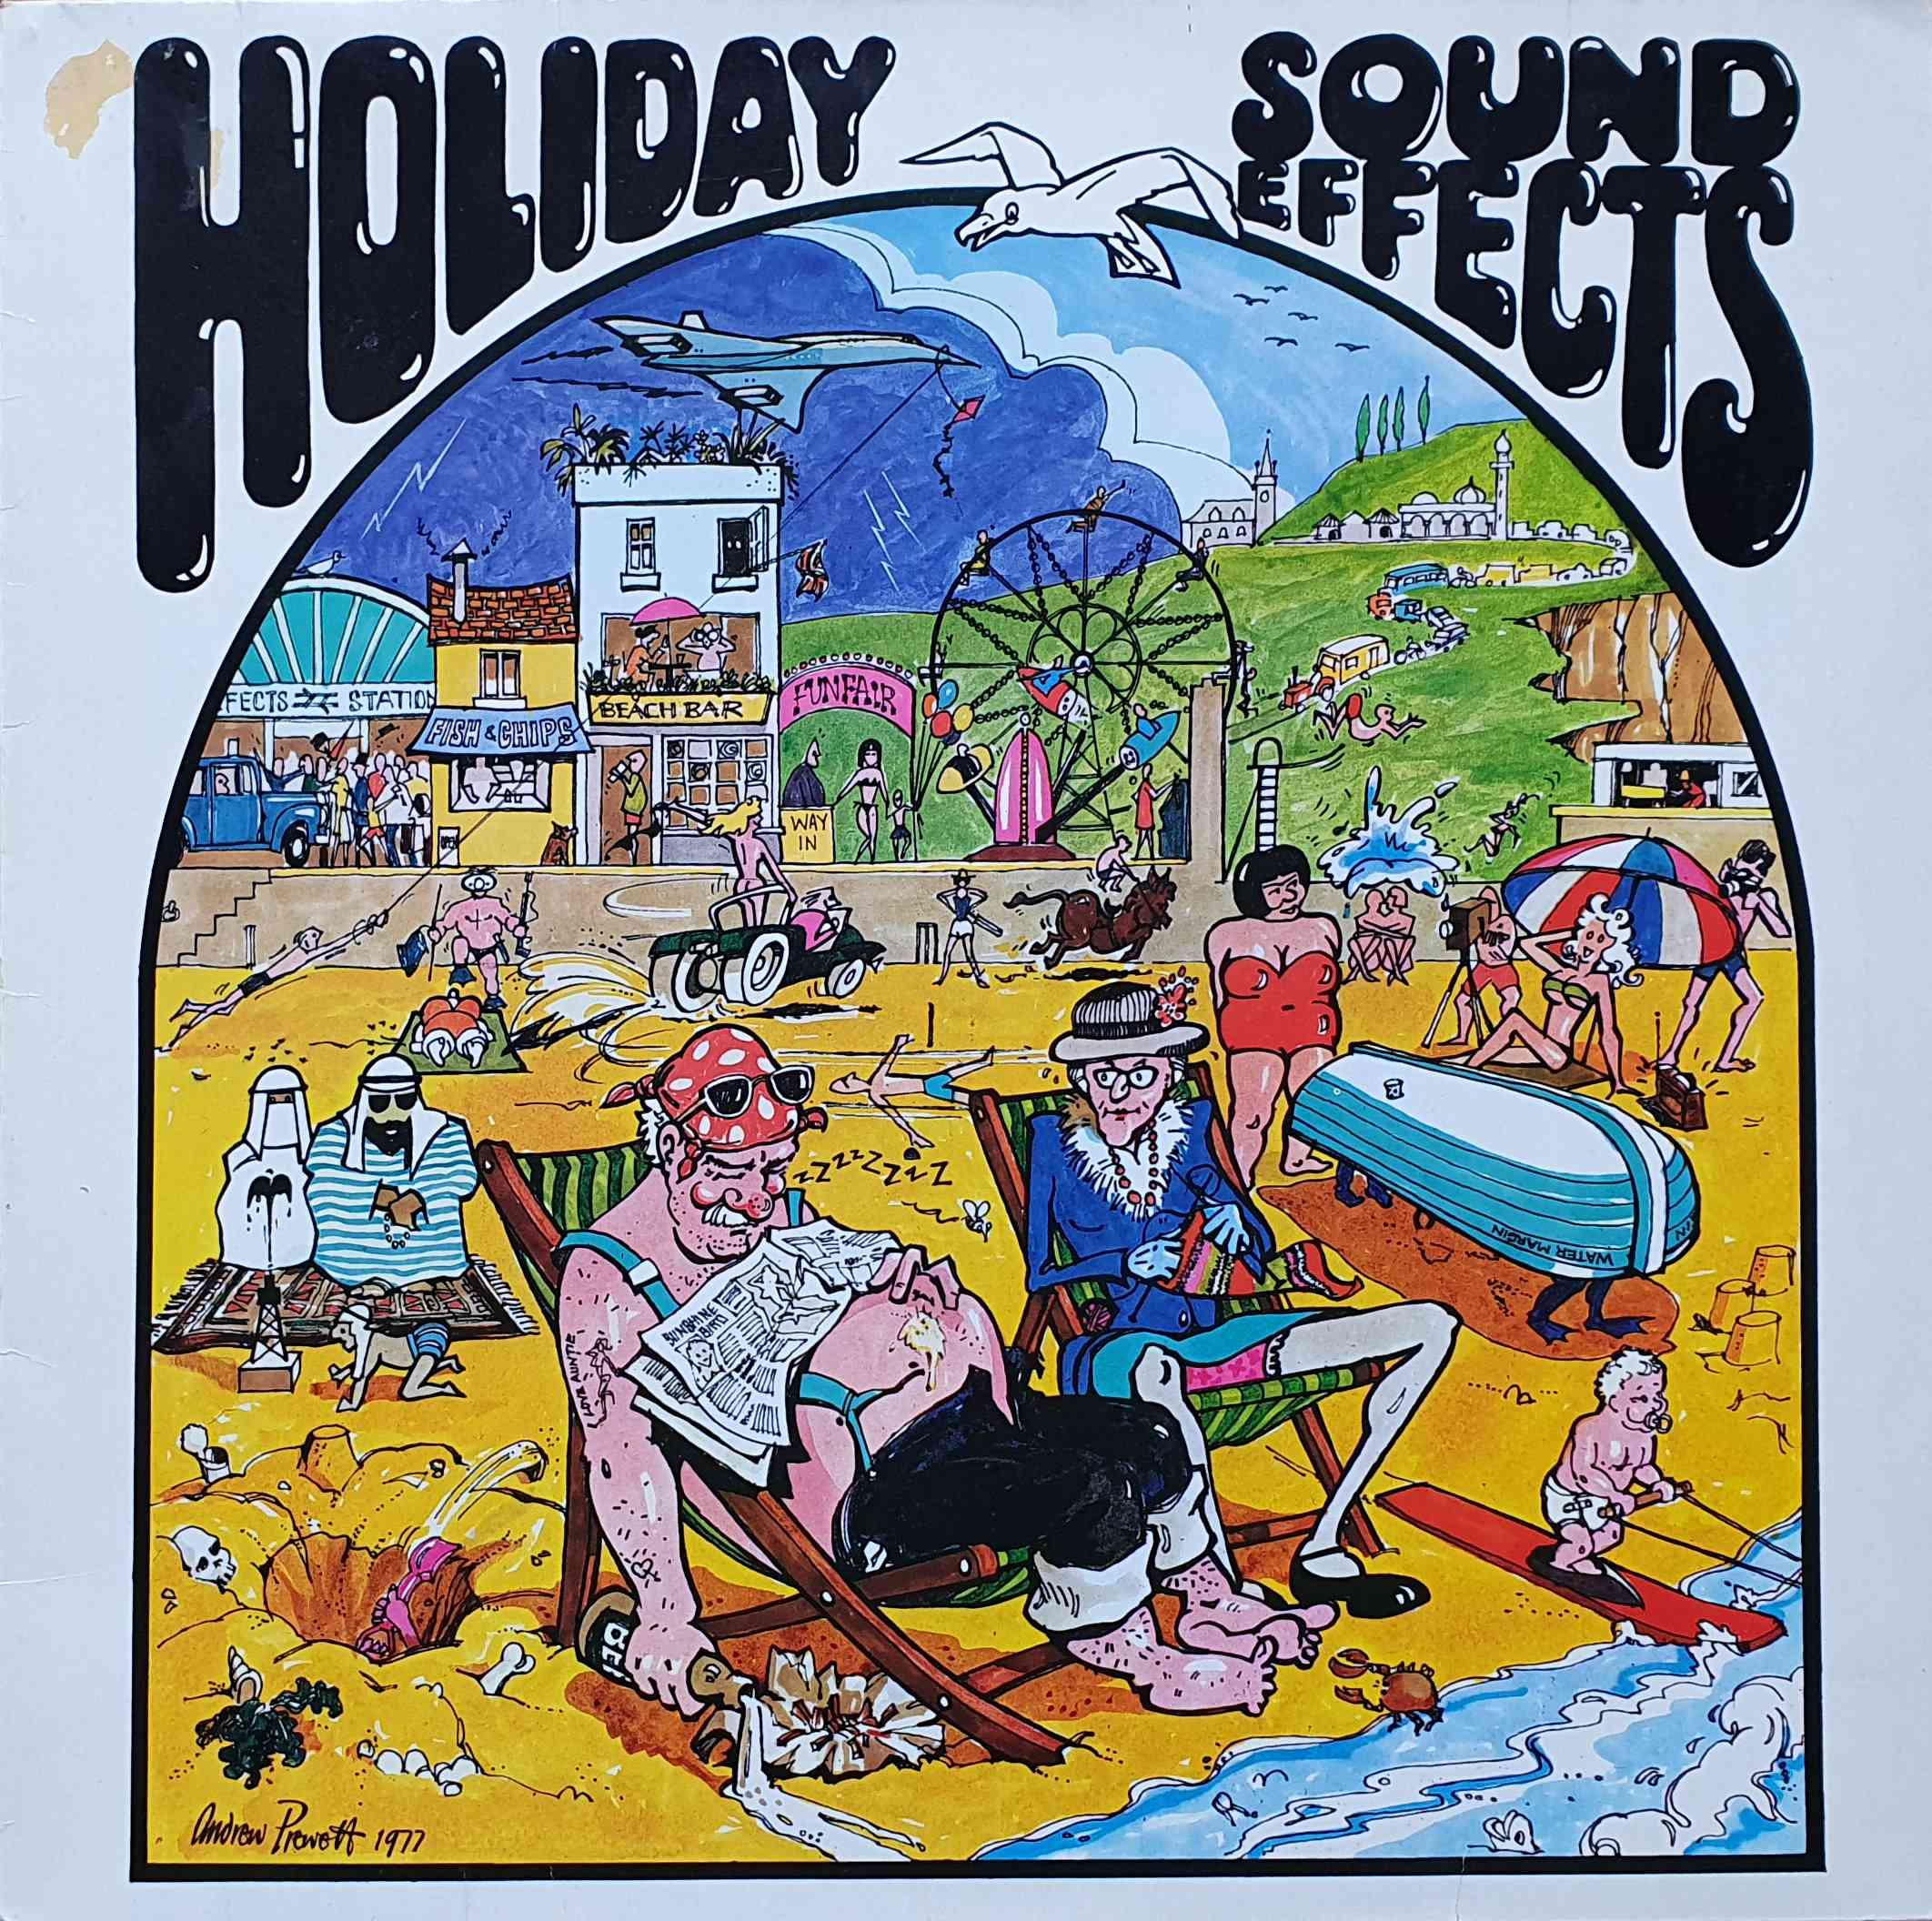 Picture of INT 128.004 Sound effects - Holiday sounds (German import) by artist Various from the BBC albums - Records and Tapes library